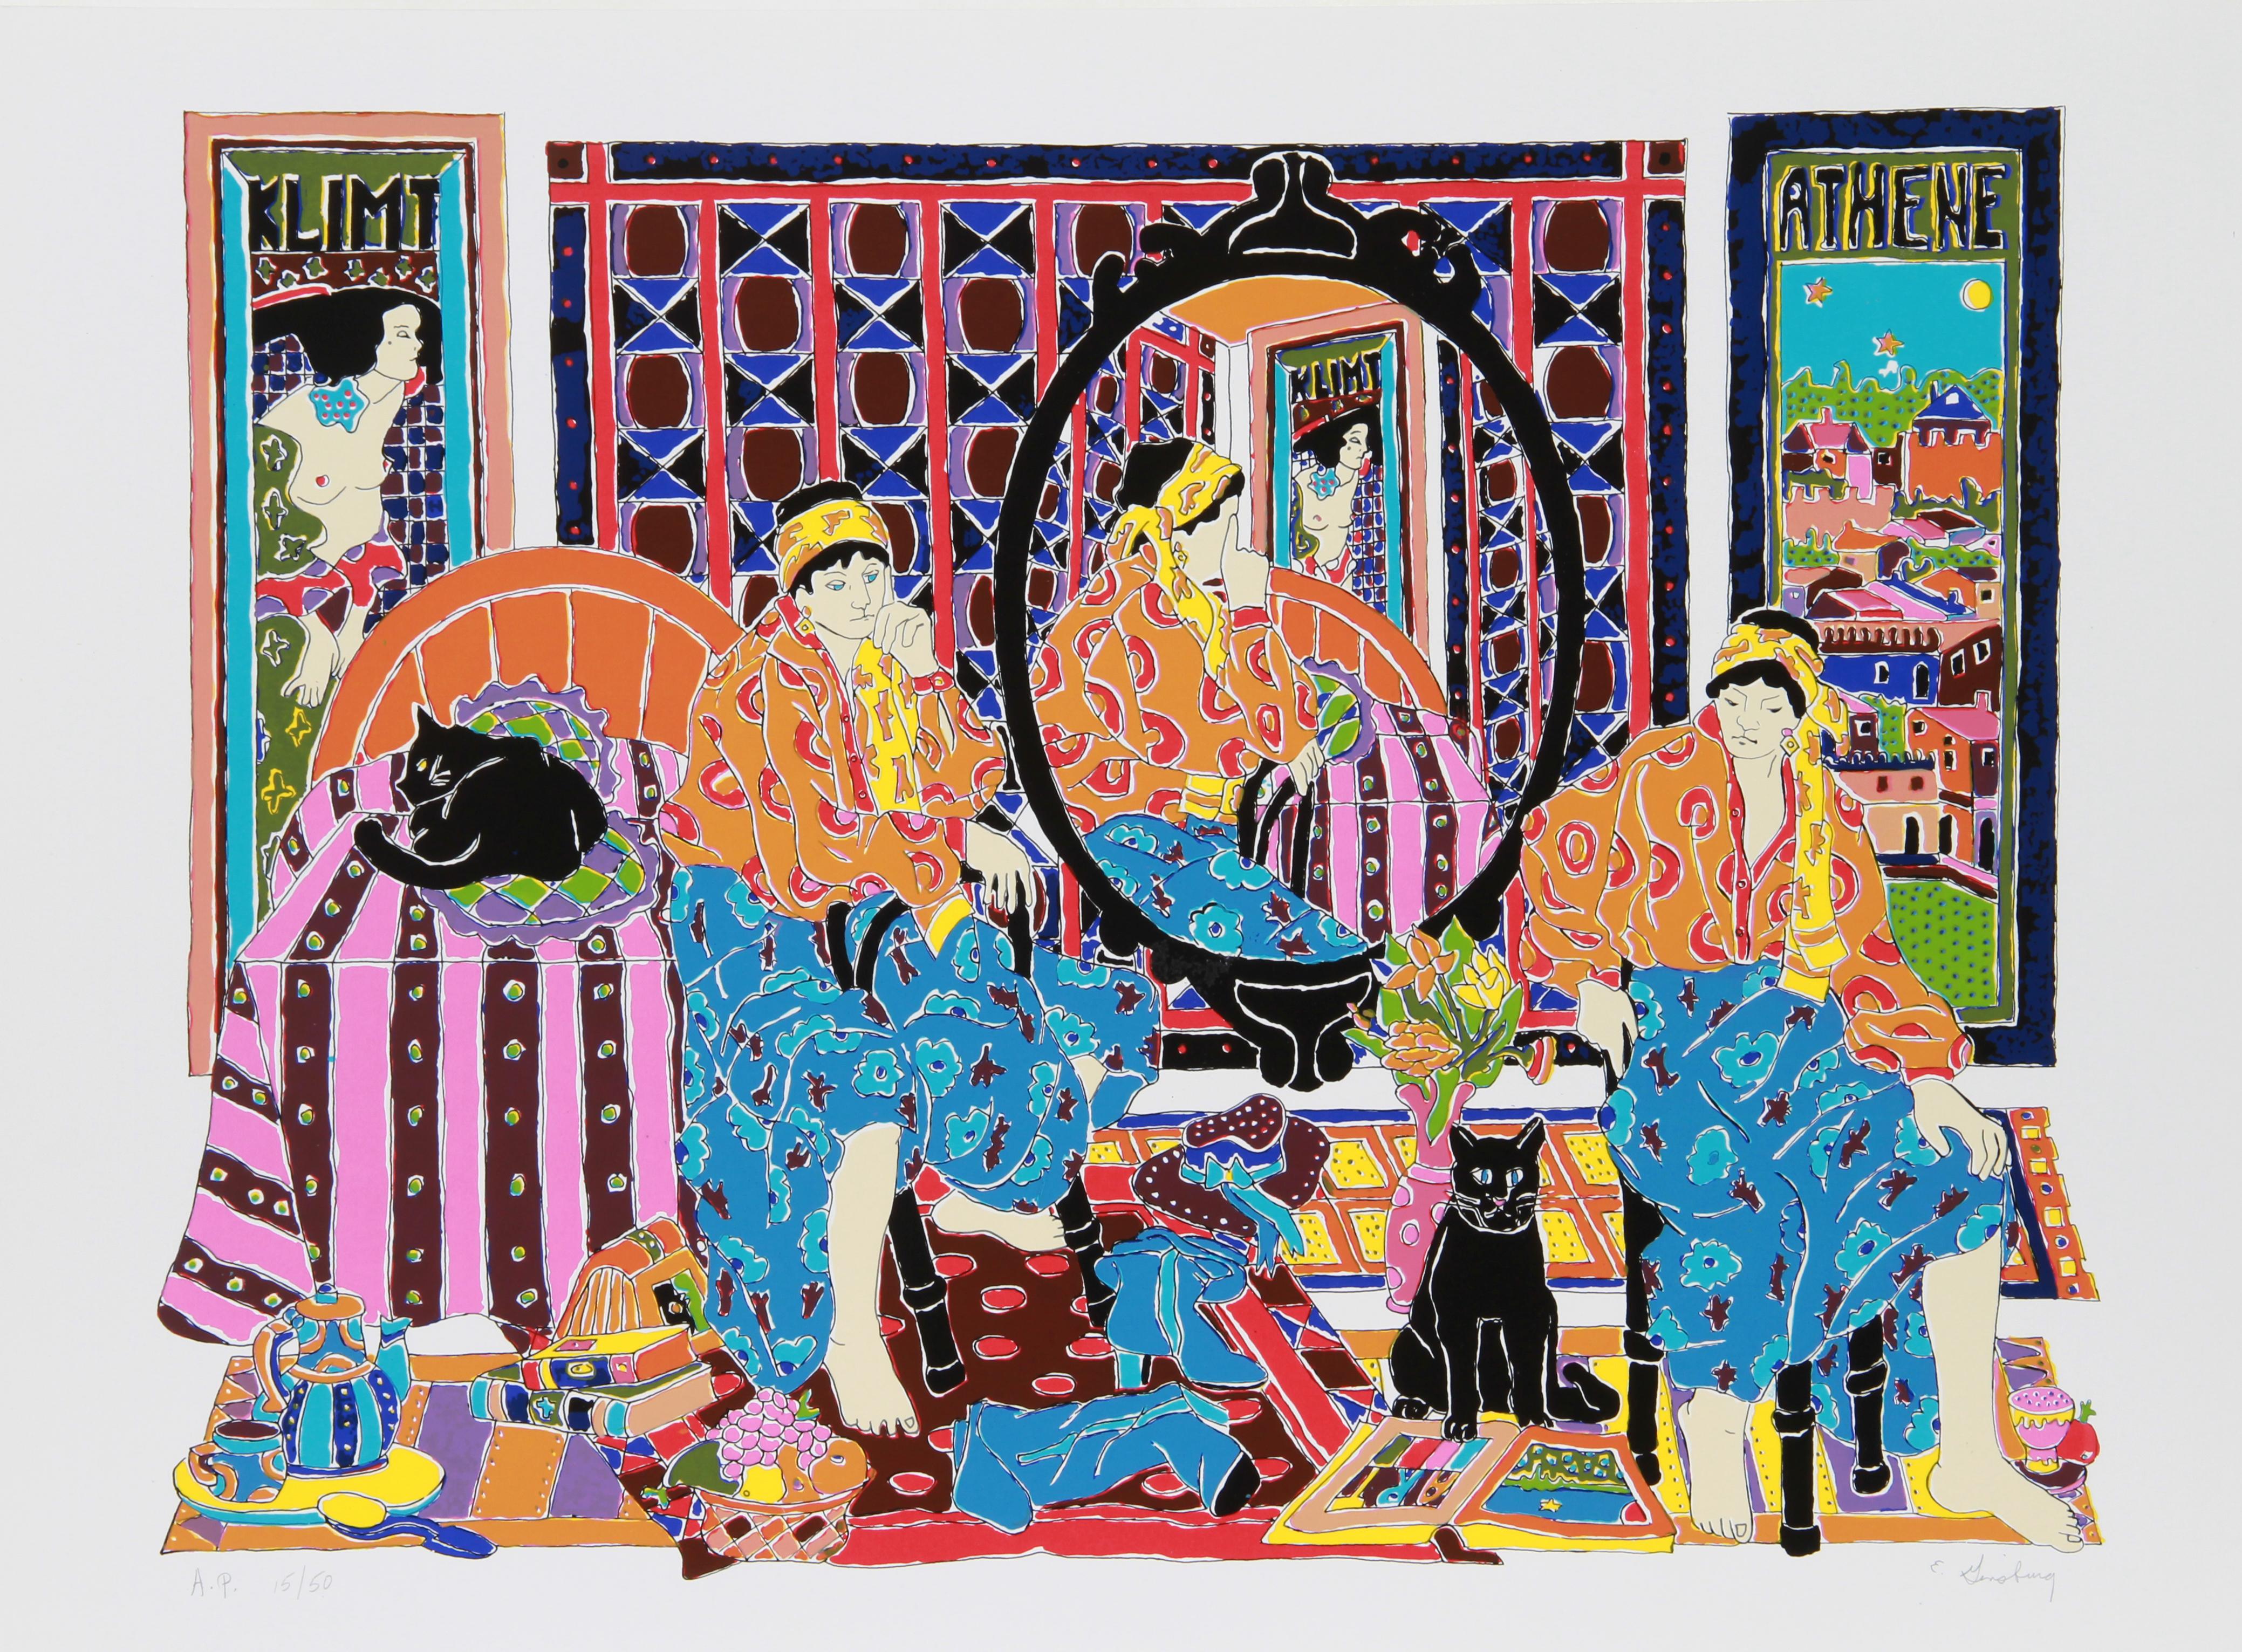 Klimt
Estelle Ginsburg, American
Date: circa 1979
Screenprint, signed and numbered in pencil
Edition of 500, AP 50
Size: 21.5 in. x 29 in. (54.61 cm x 73.66 cm)